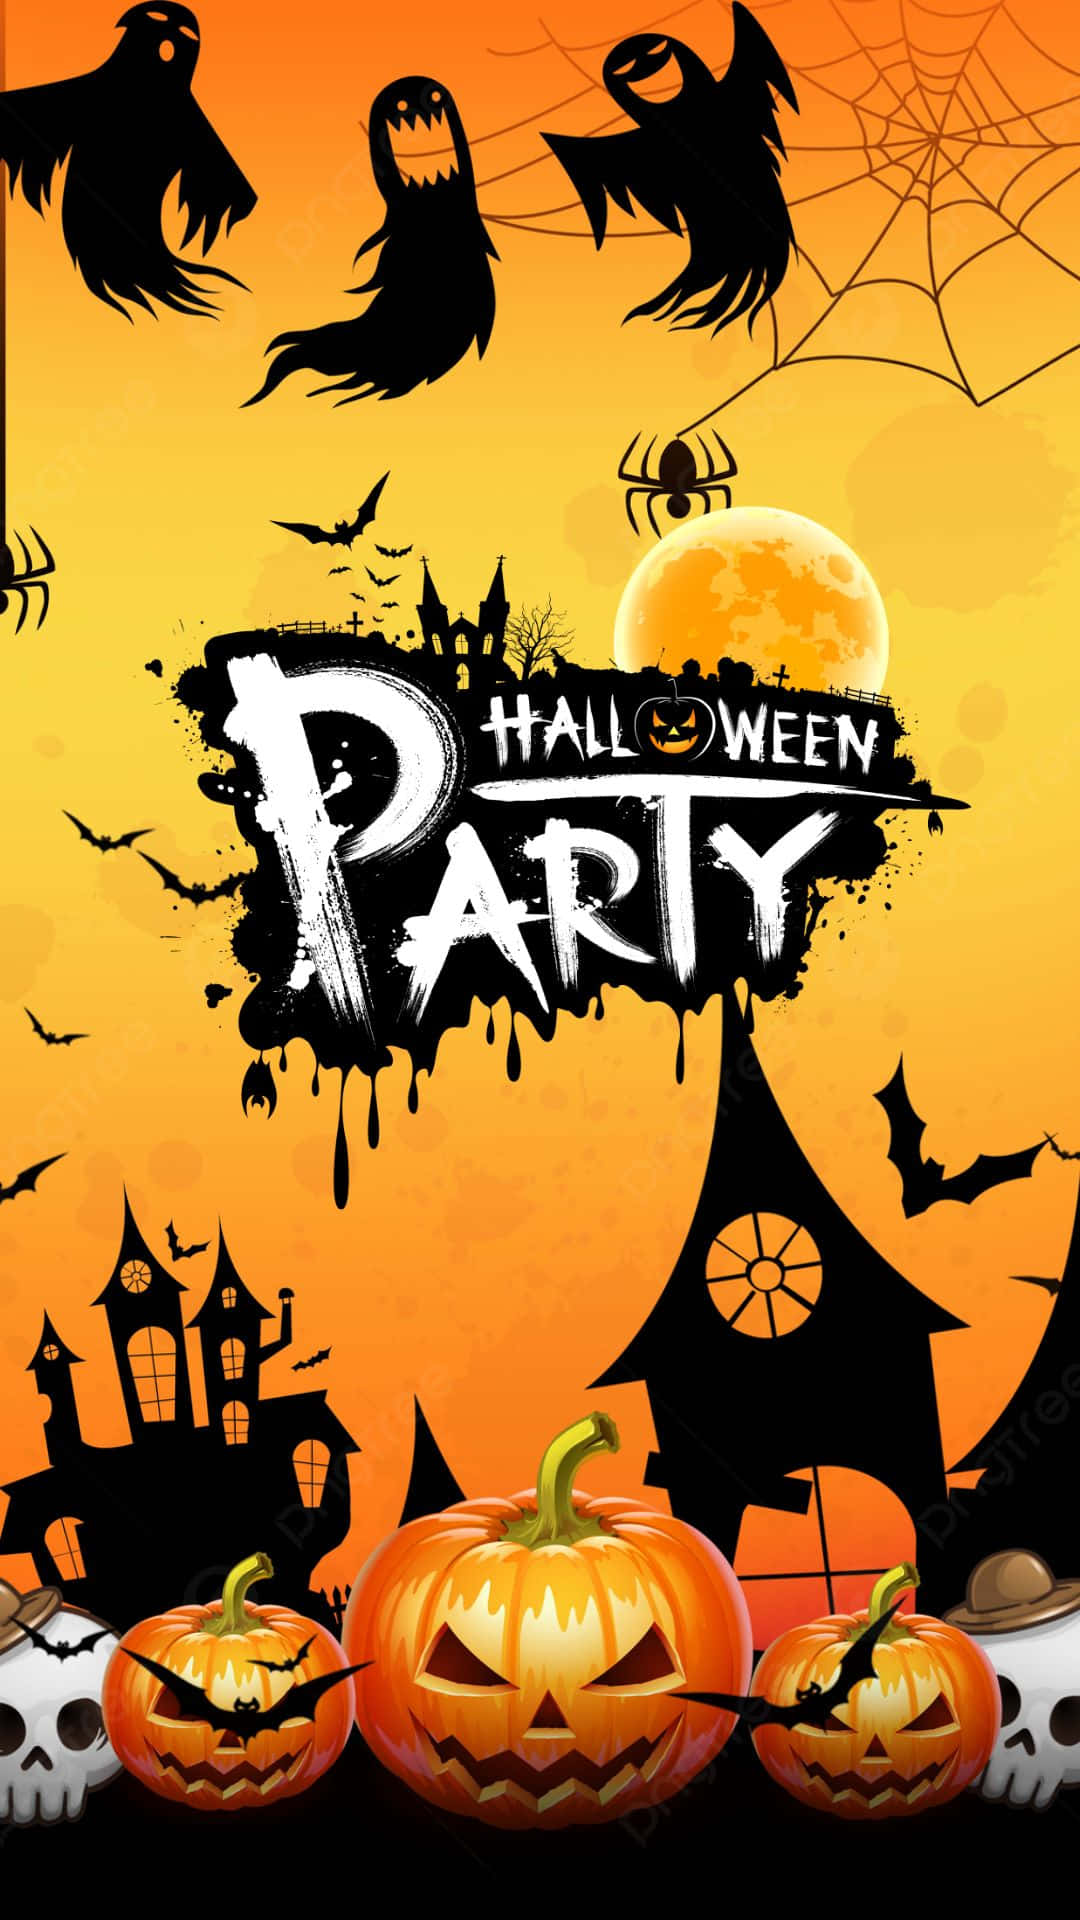 Get your spook on this Halloween with the best party around!